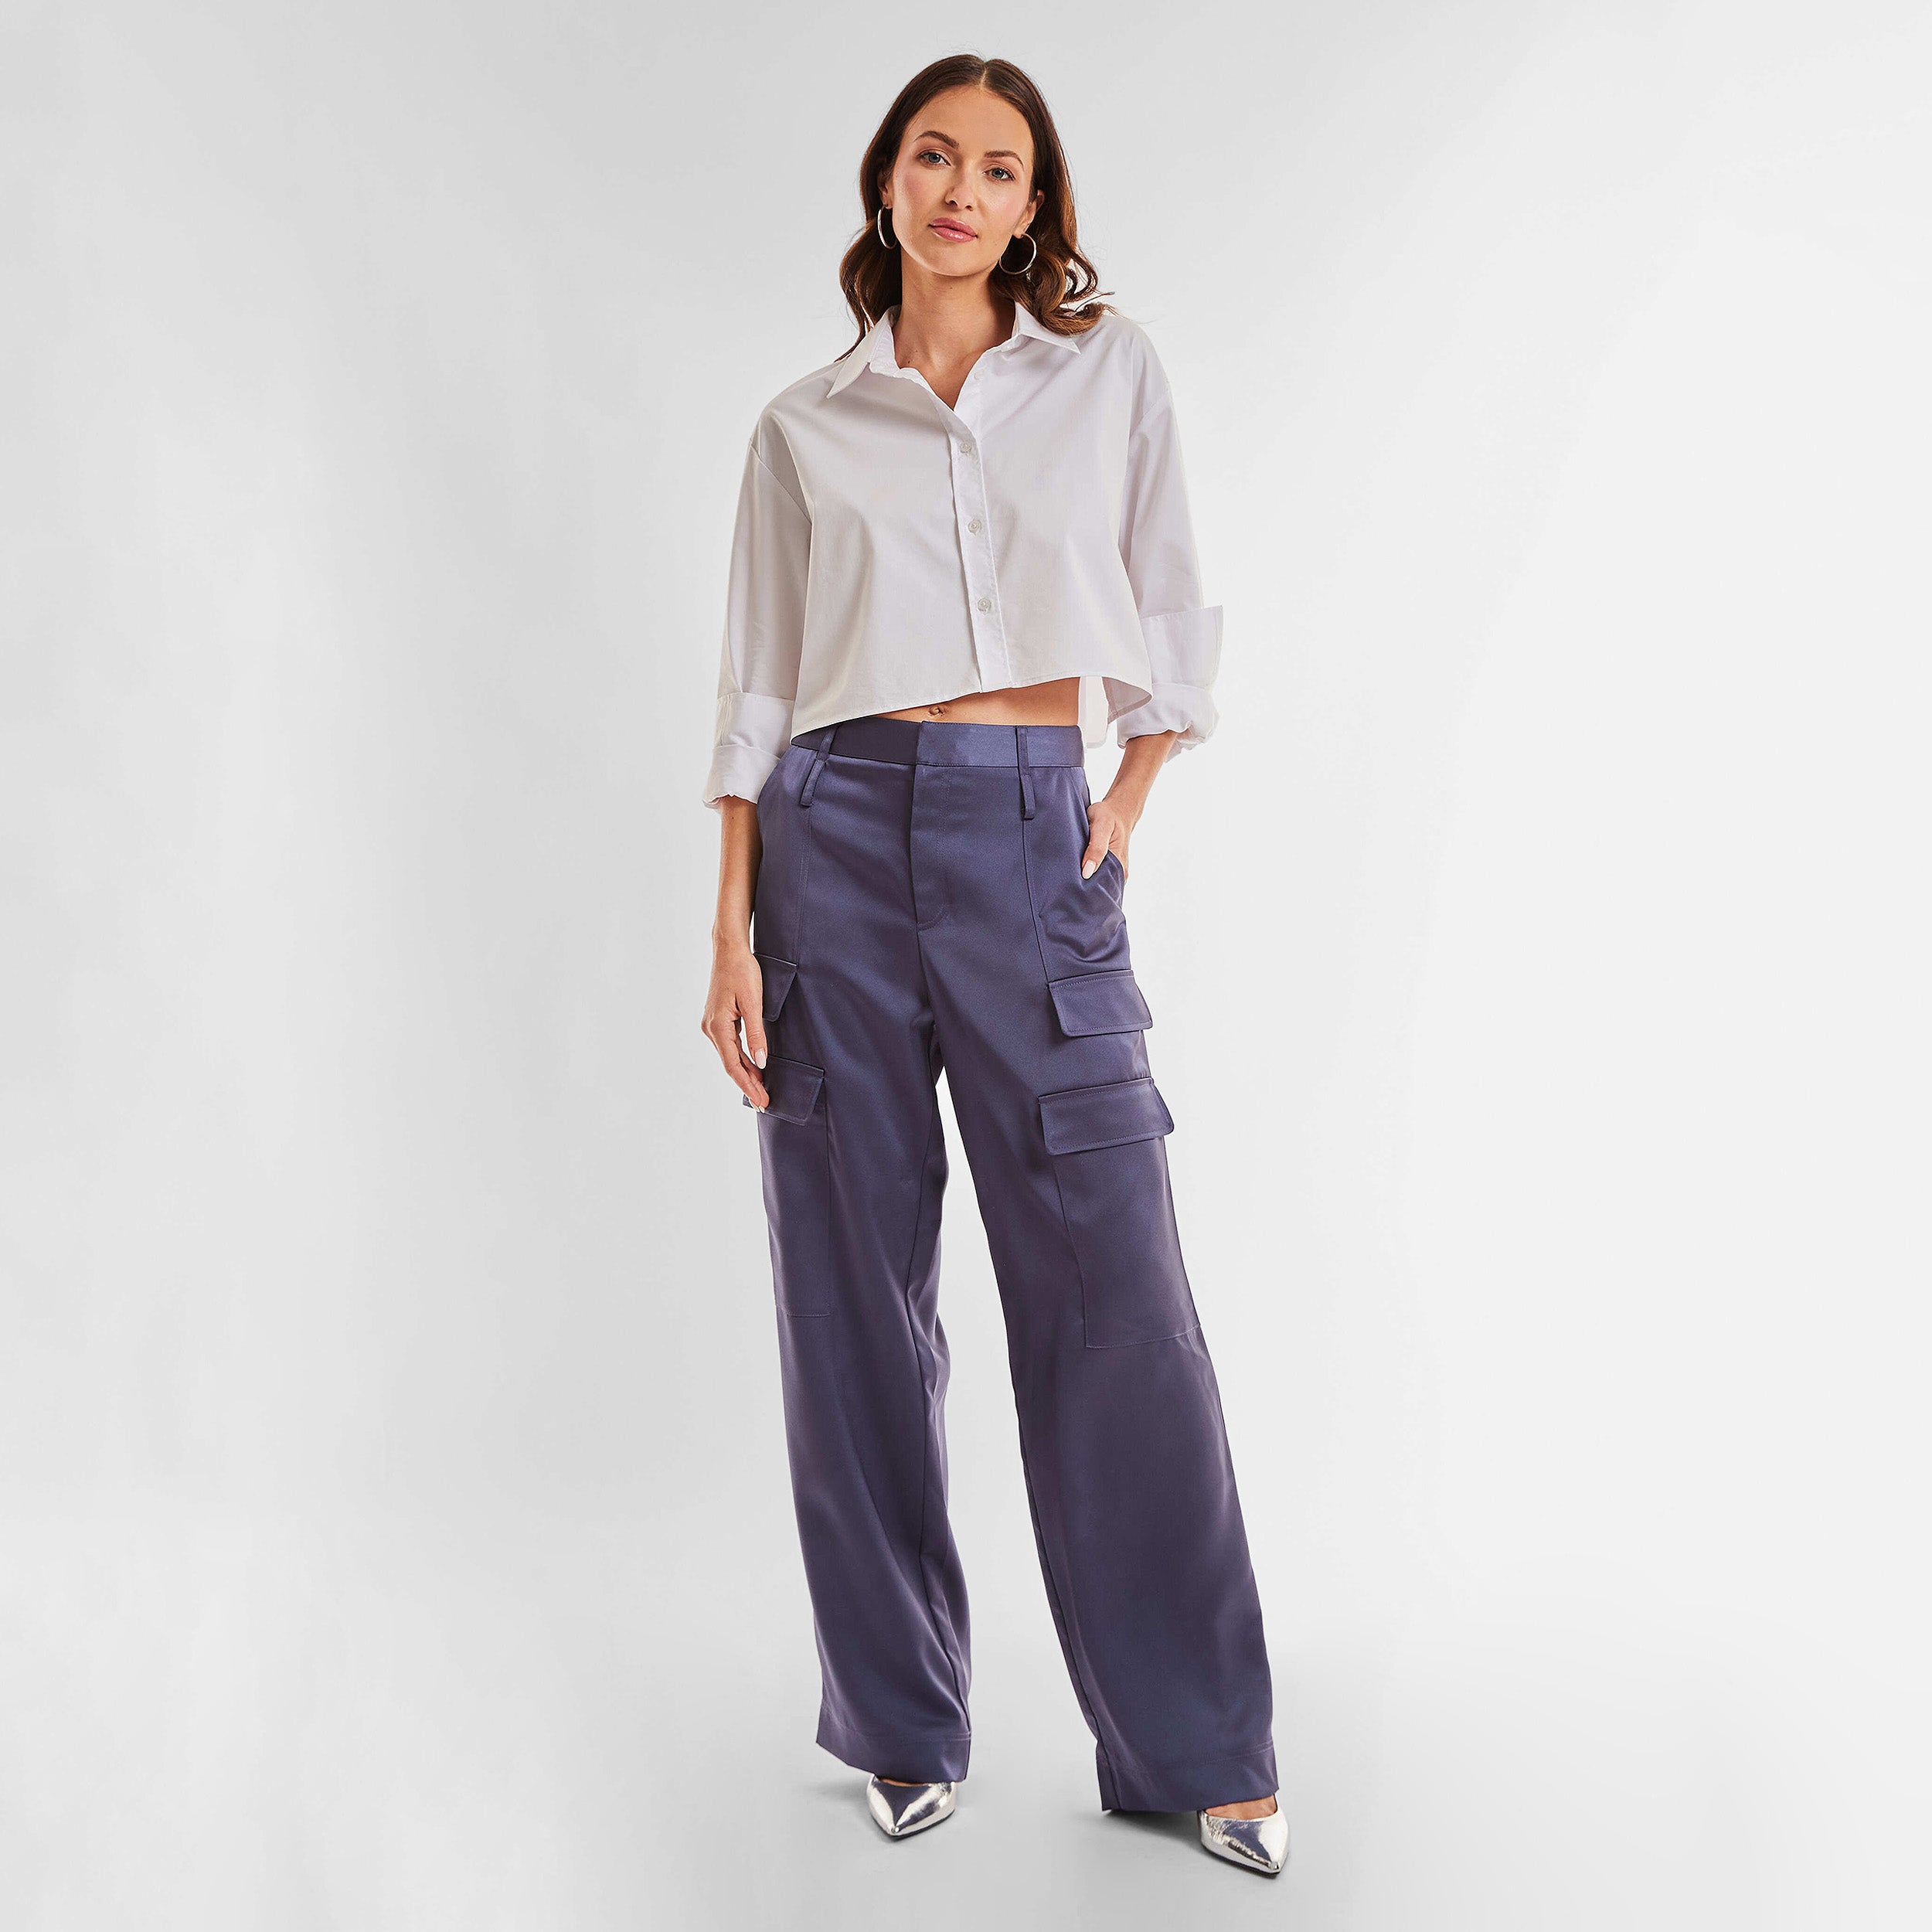 Full view of woman wearing Navy Satin Milan Pant features Mid-rise with side pockets and cargo detail. Luxurious and structured satin-like fabric. 